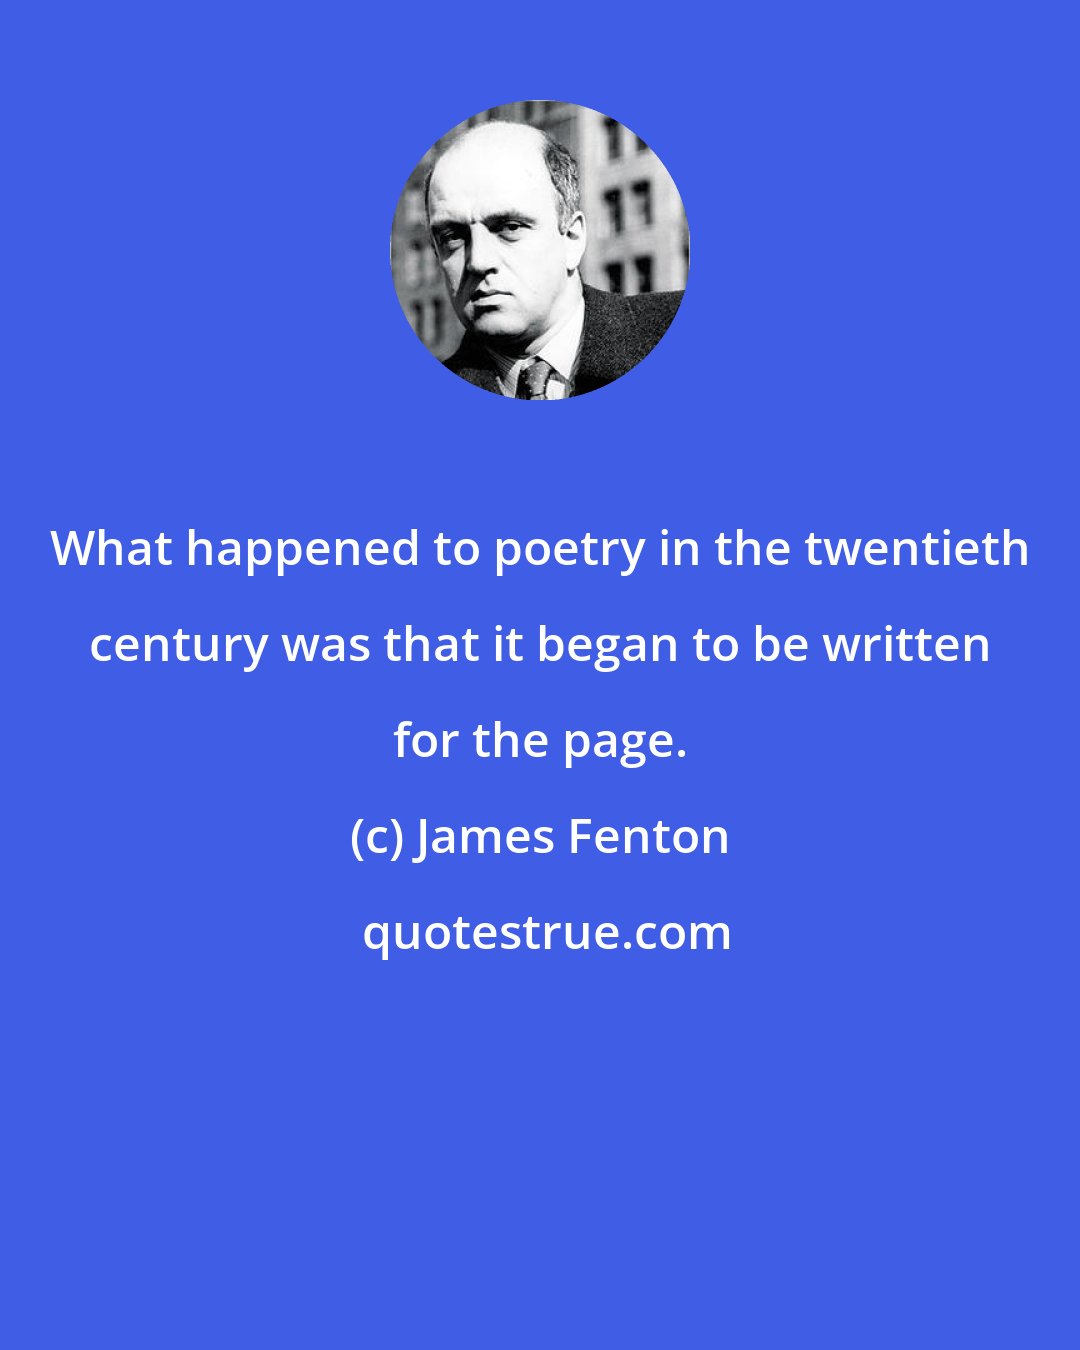 James Fenton: What happened to poetry in the twentieth century was that it began to be written for the page.